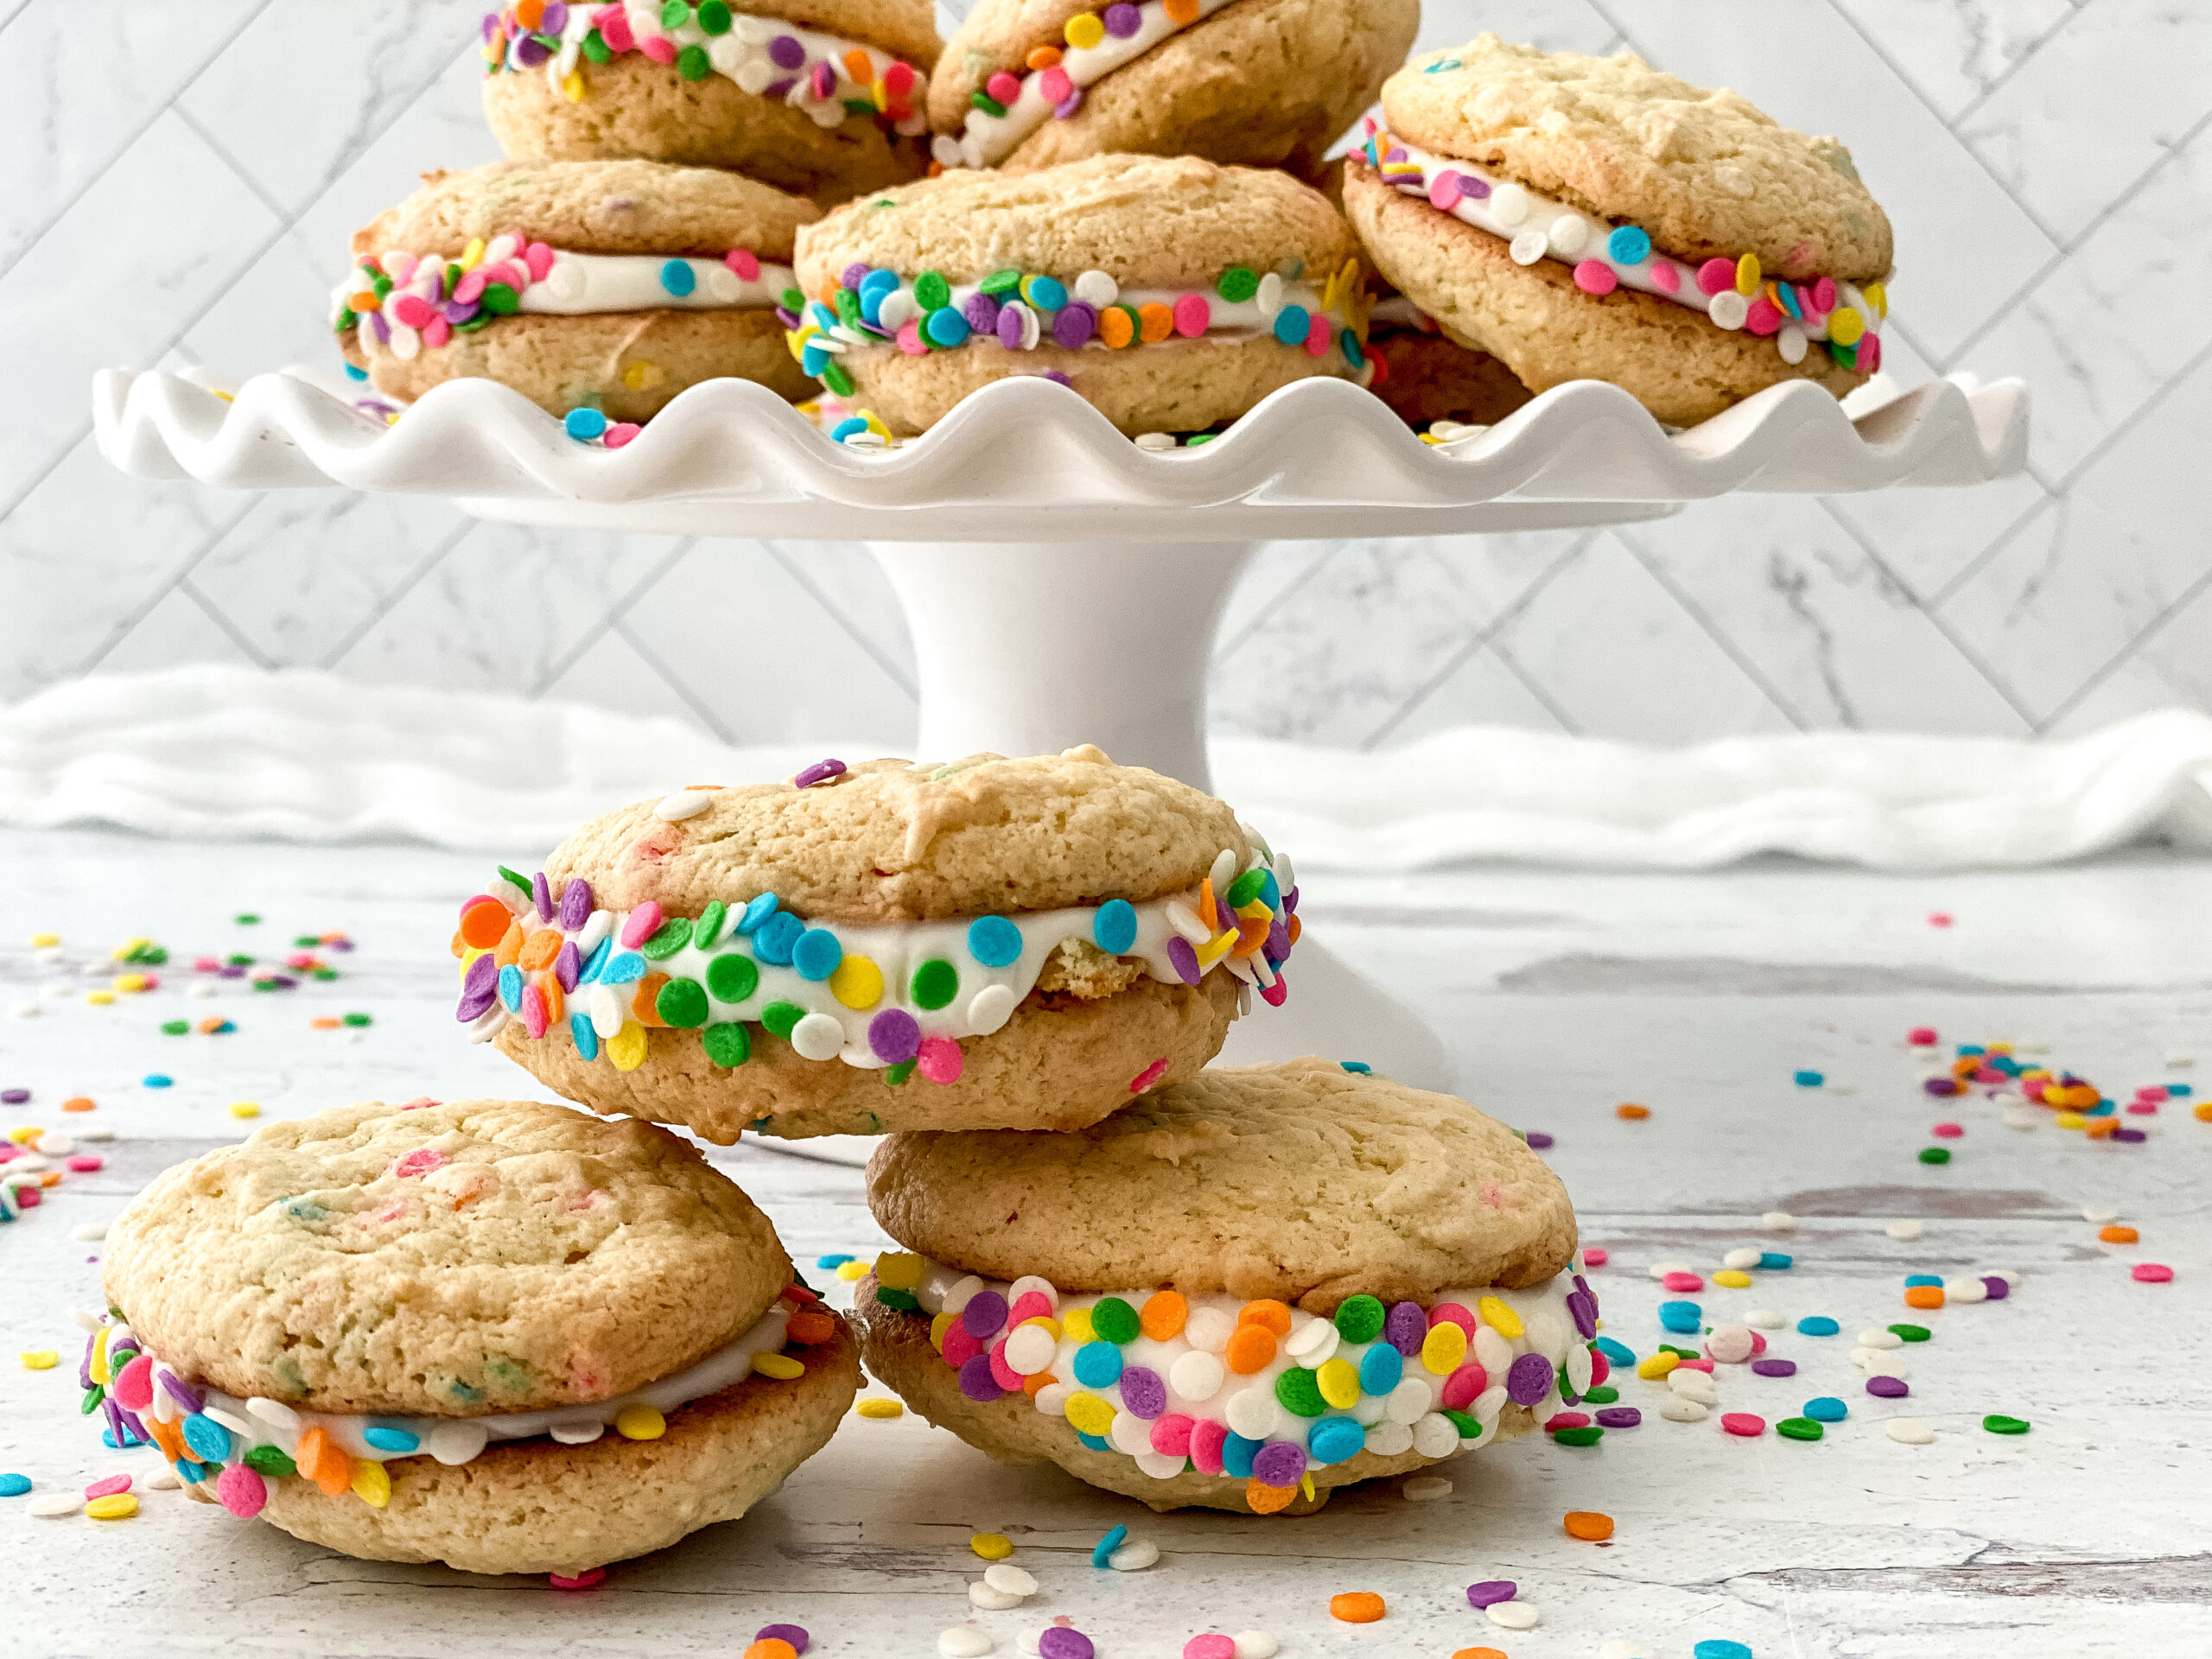 Make These Fun & Festive Cake Mix Whoopie Pies for any Occasion!